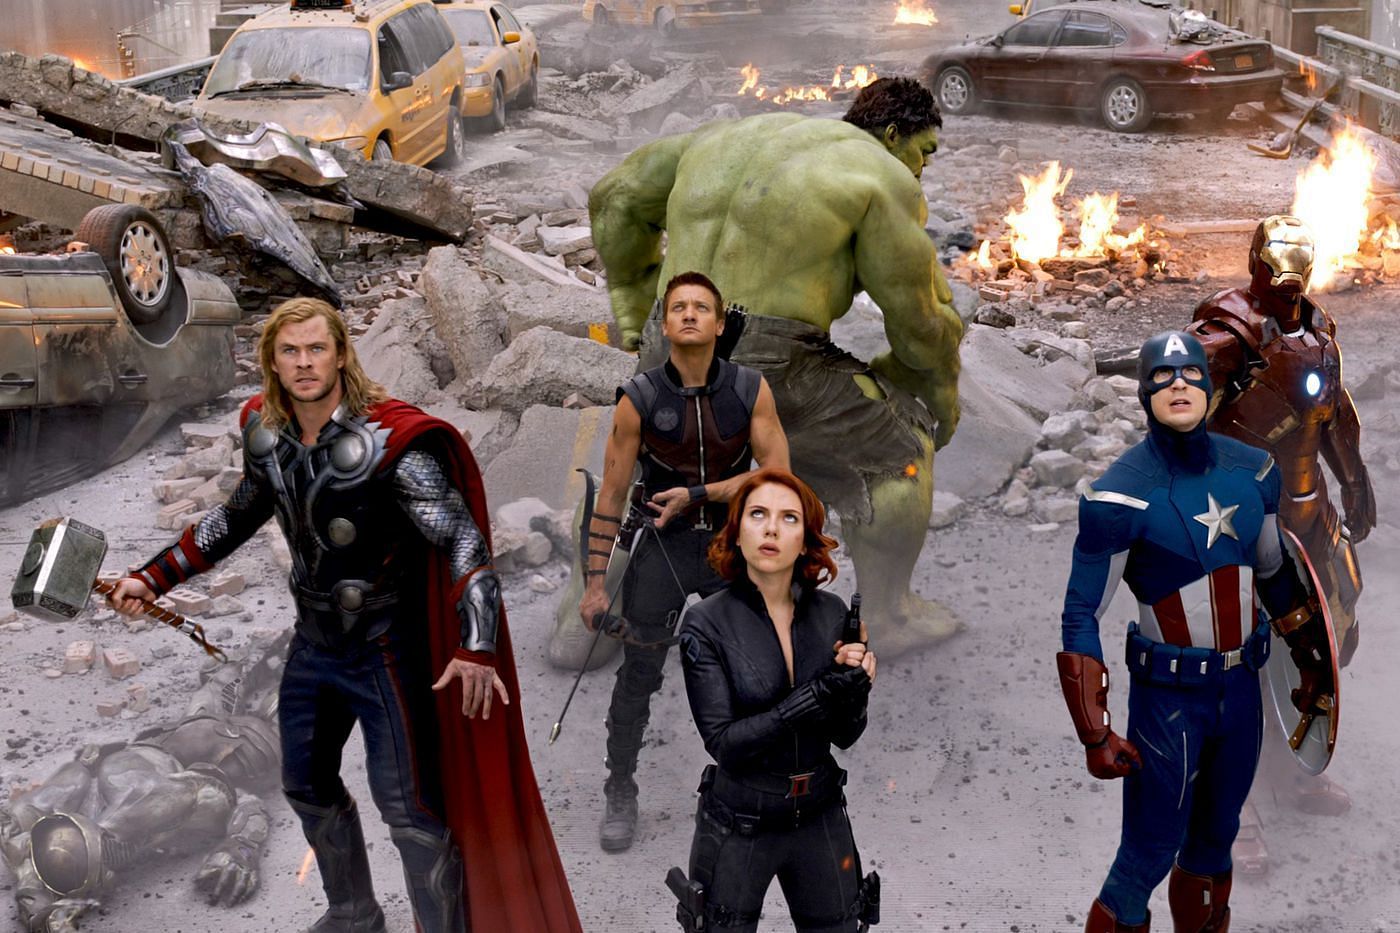 The Avengers relies too much on spectacle, leaving little room for narrative depth (Image via Marvel Studios)